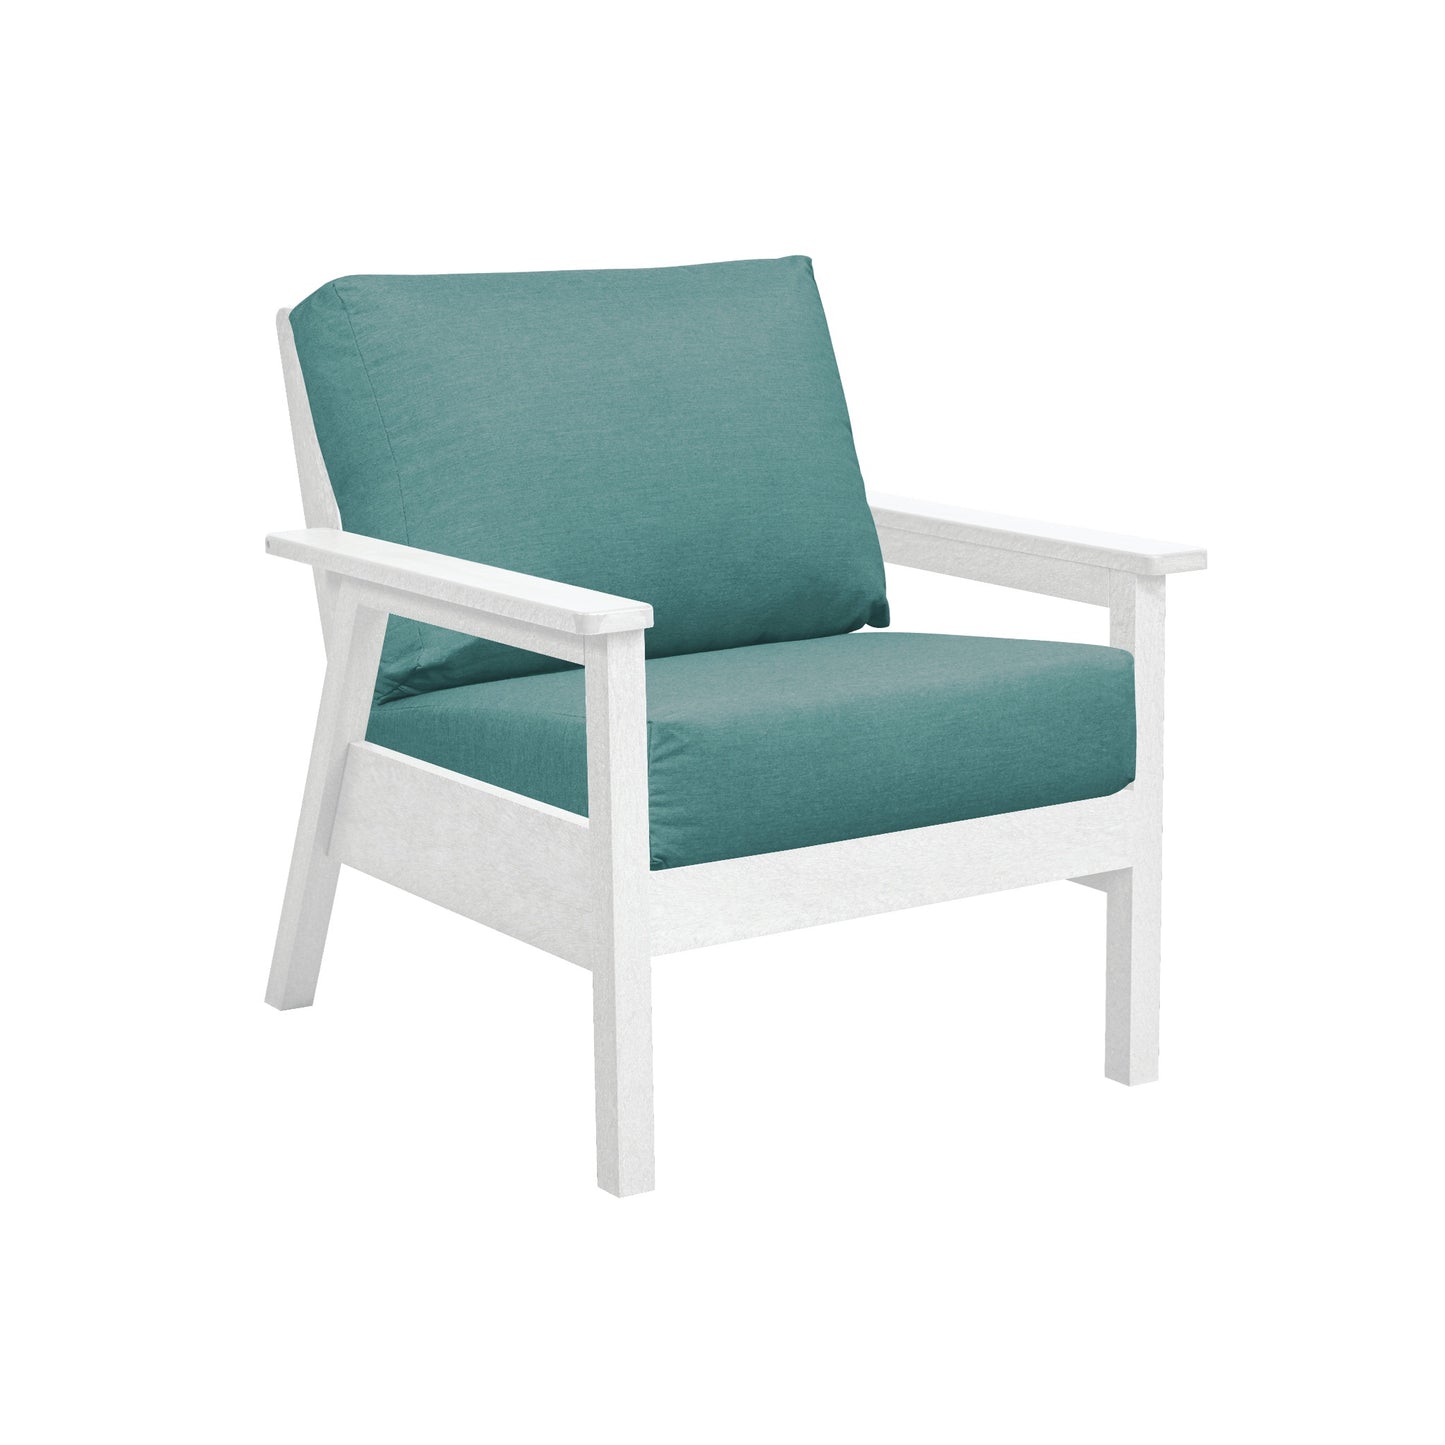 Tofino Chair WHITE FRAME WITH CUSHIONS - DSF281 [DSF241]